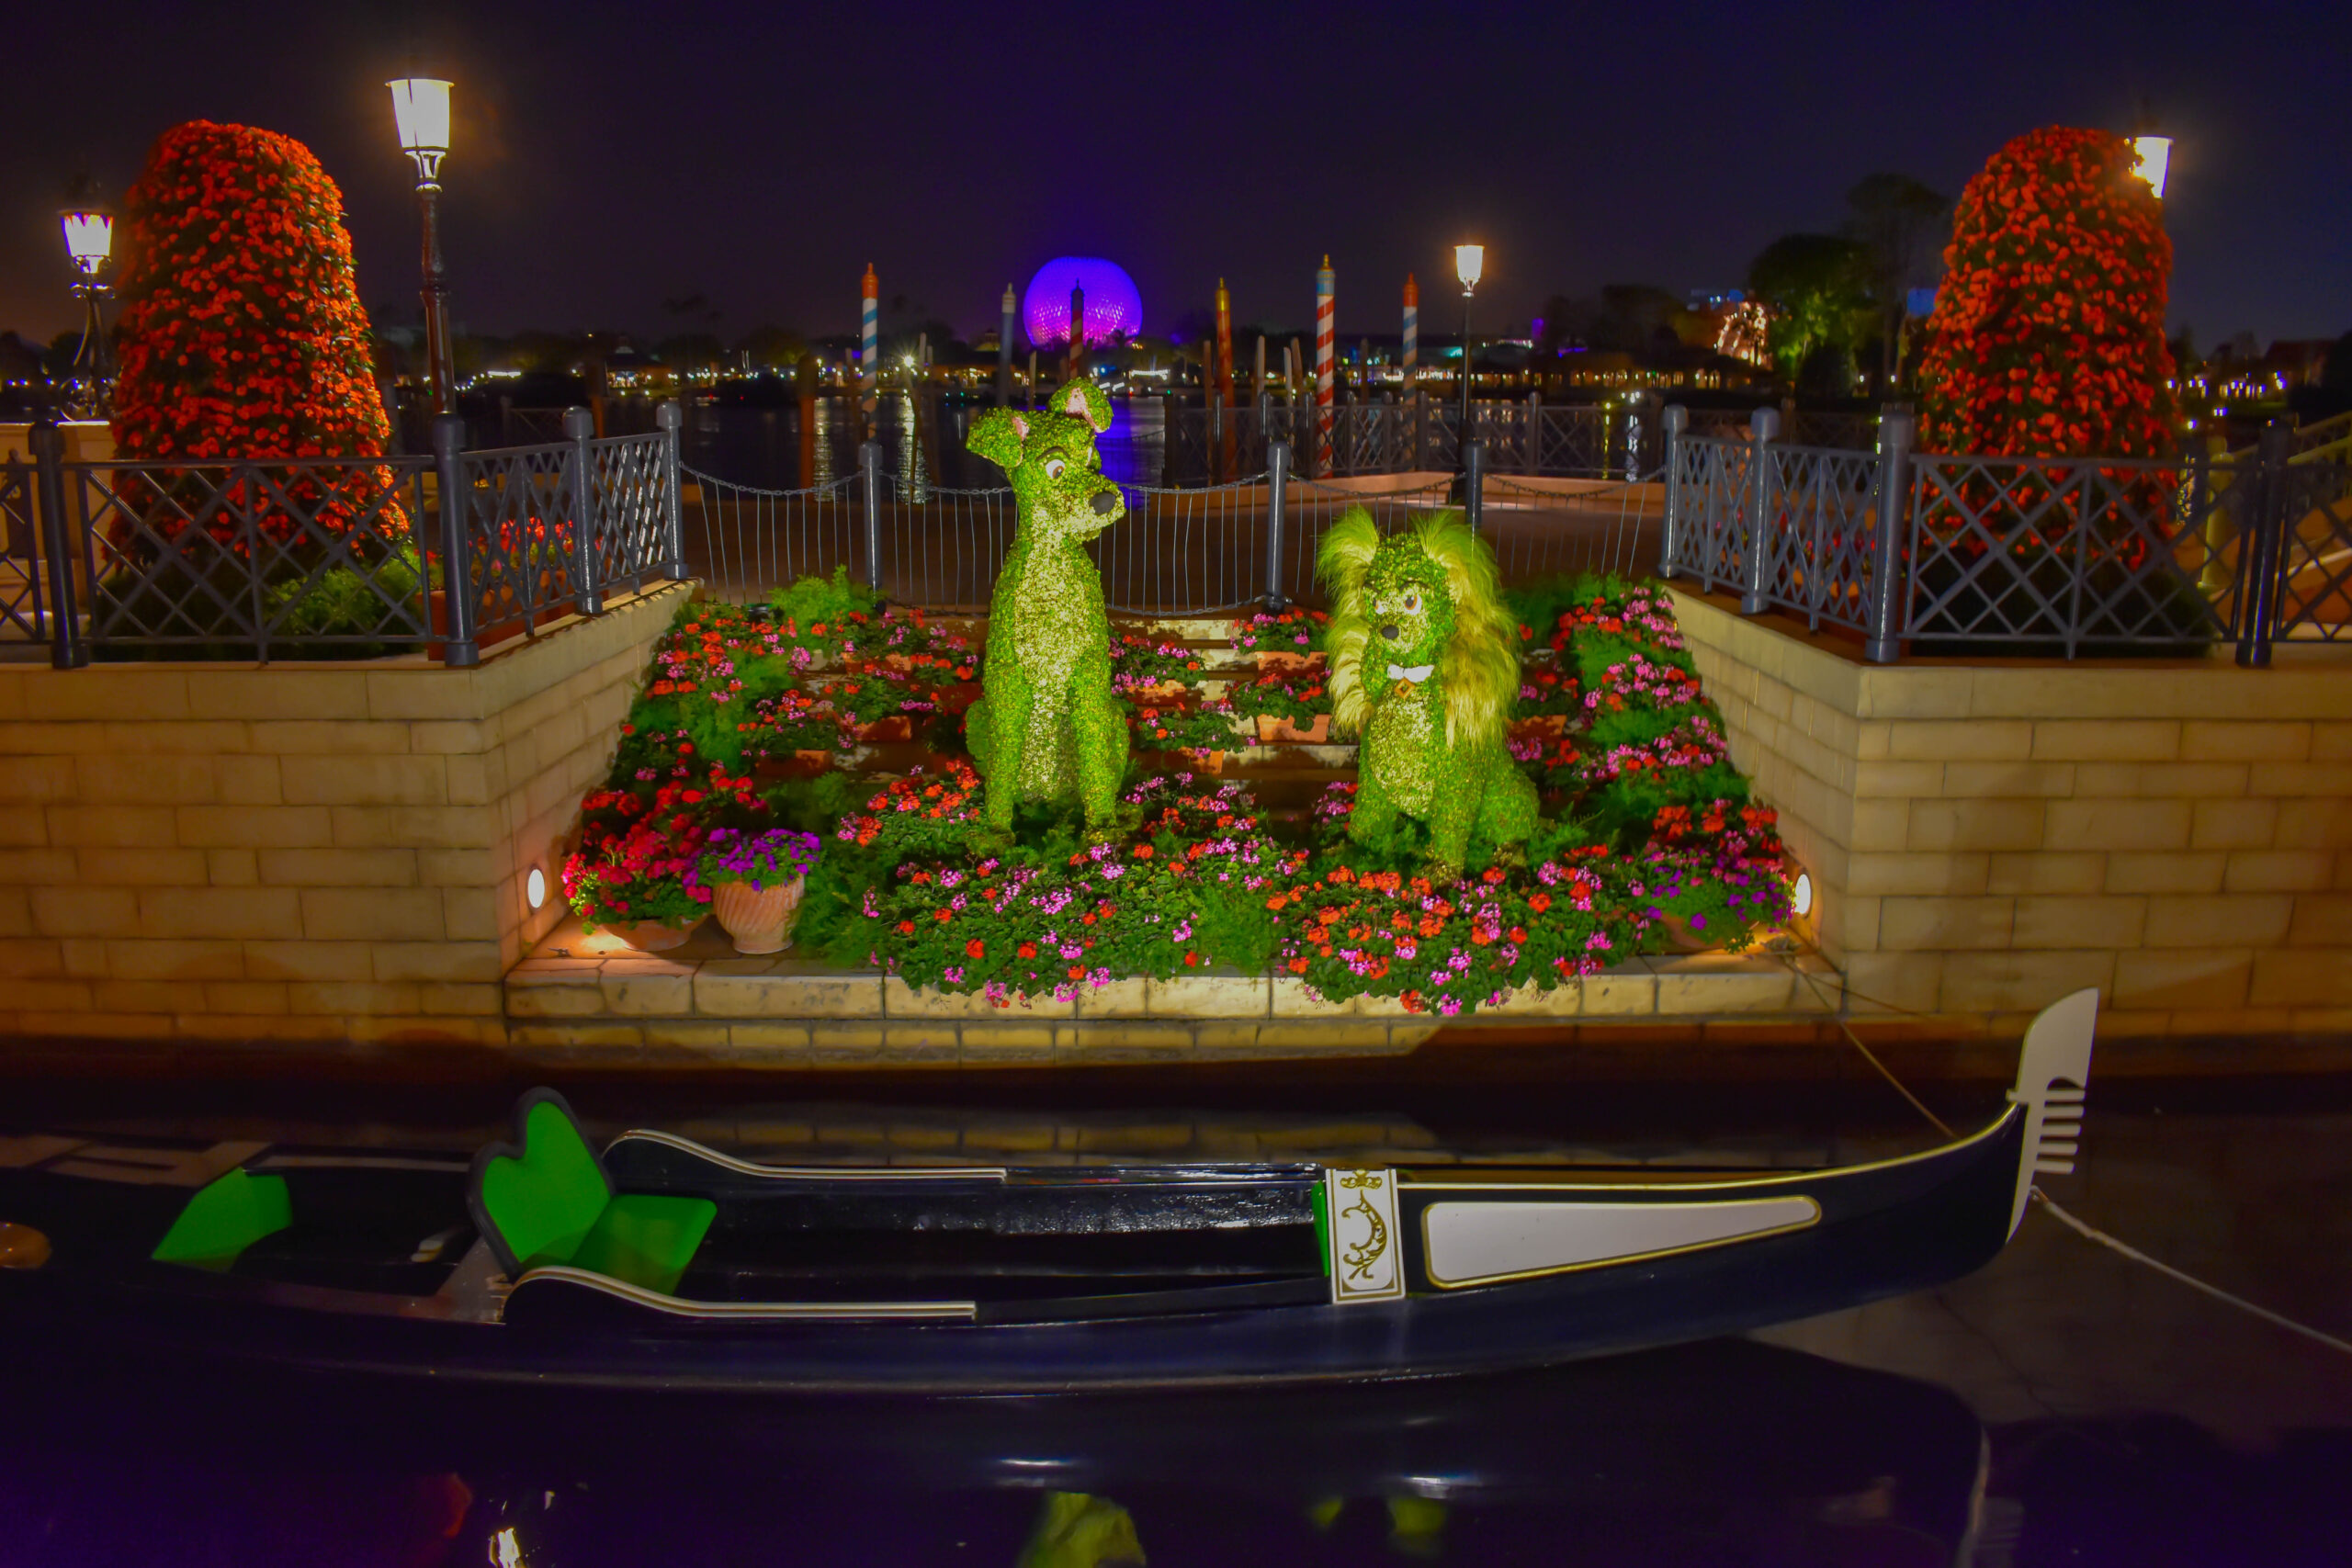 Lady and the Tramp in Italy Pavilion at night in Epcot.